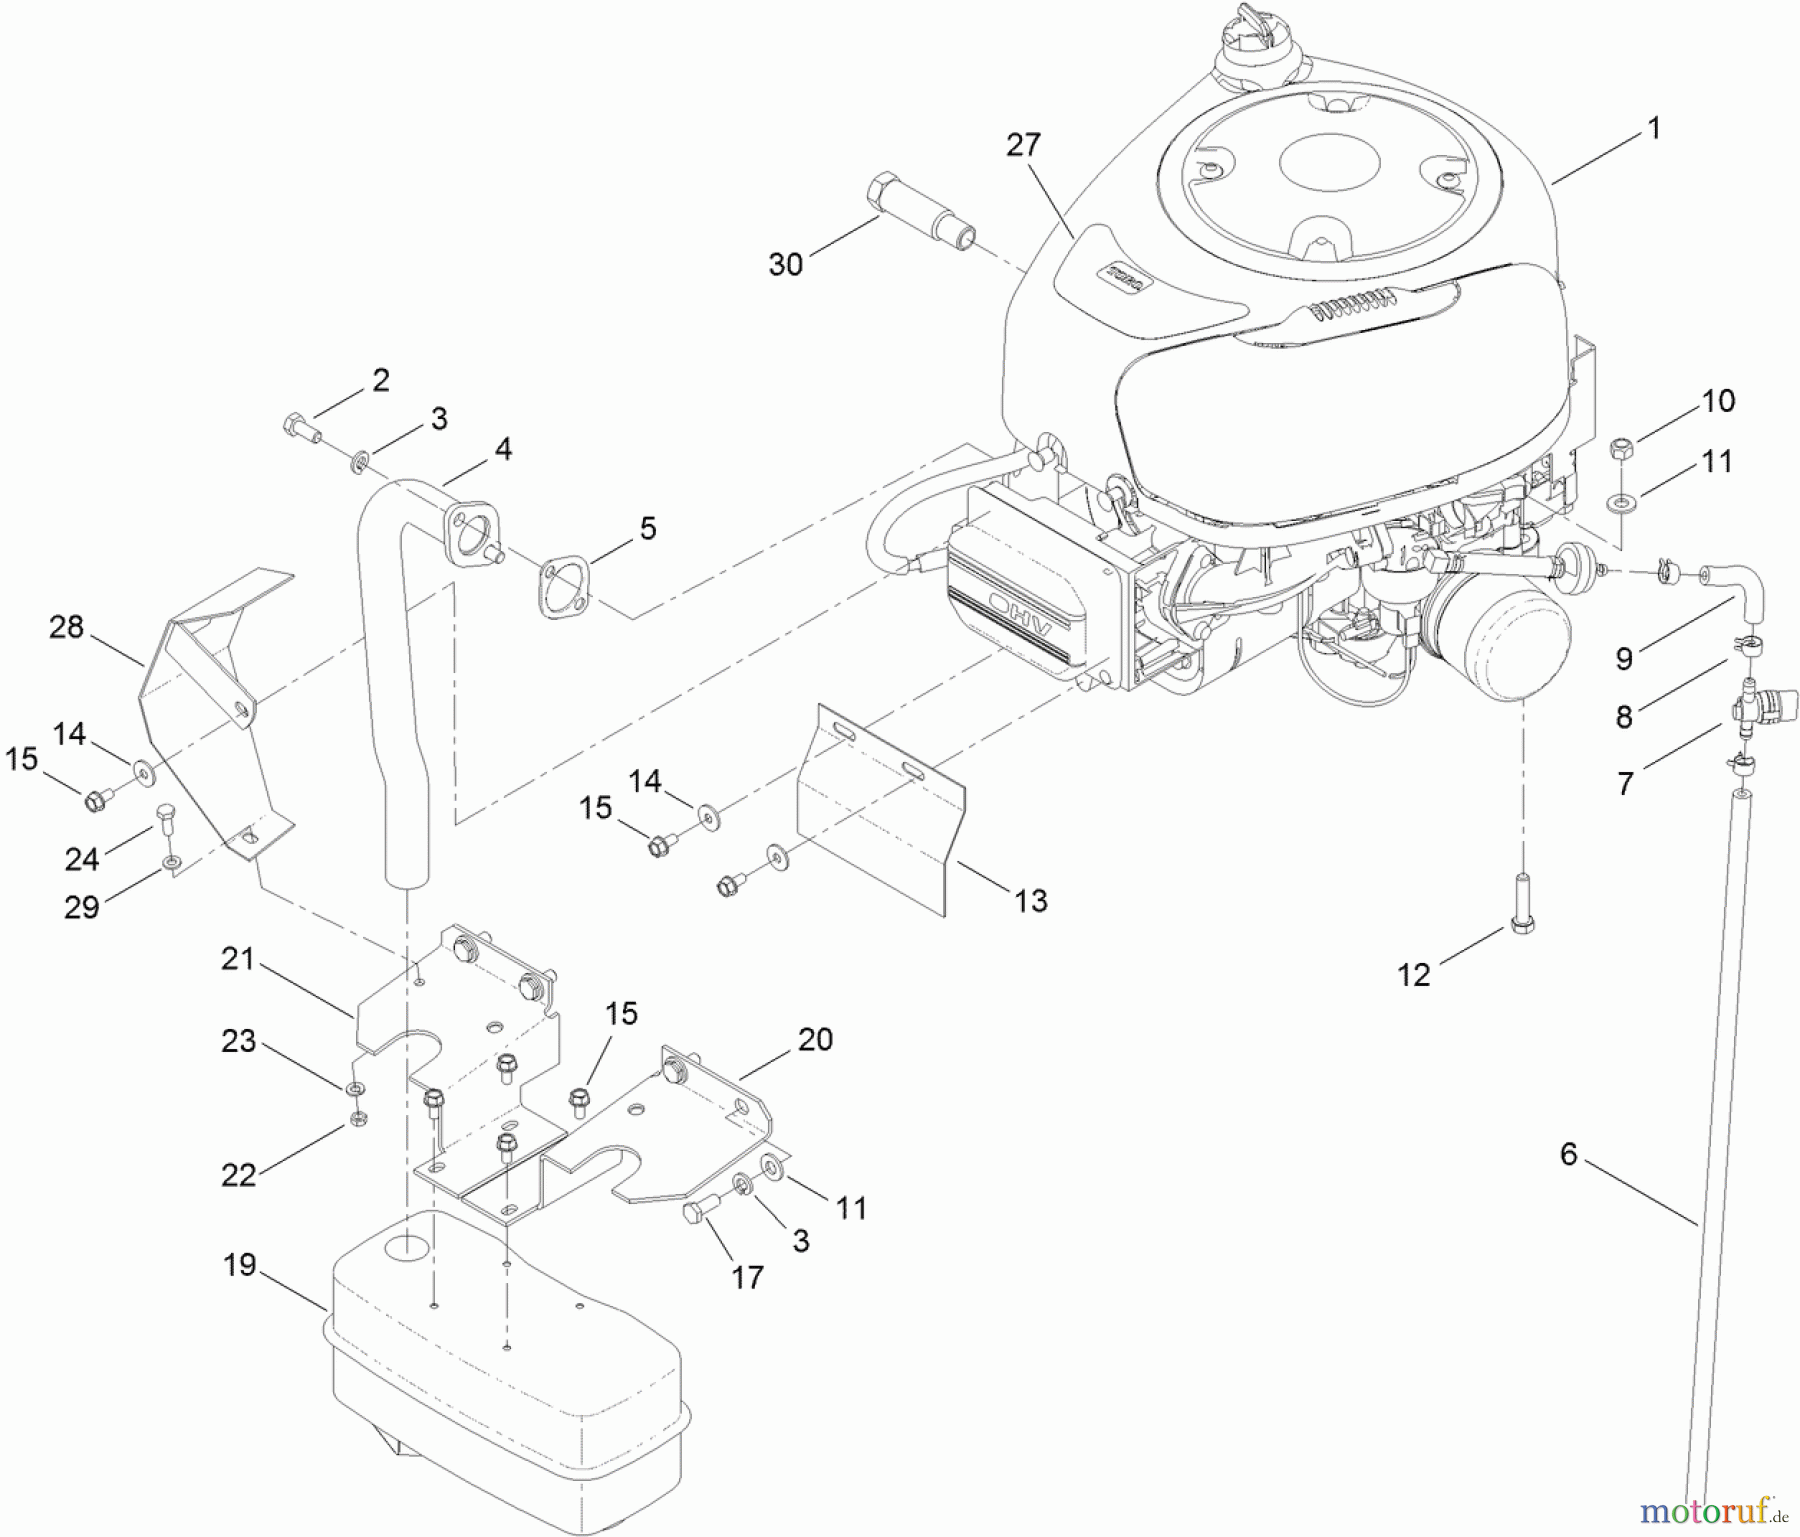  Toro Neu Mowers, Lawn & Garden Tractor Seite 1 74582 (DH 210) - Toro DH 210 Lawn Tractor, 2011 (311000001-311999999) ENGINE AND MUFFLER ASSEMBLY